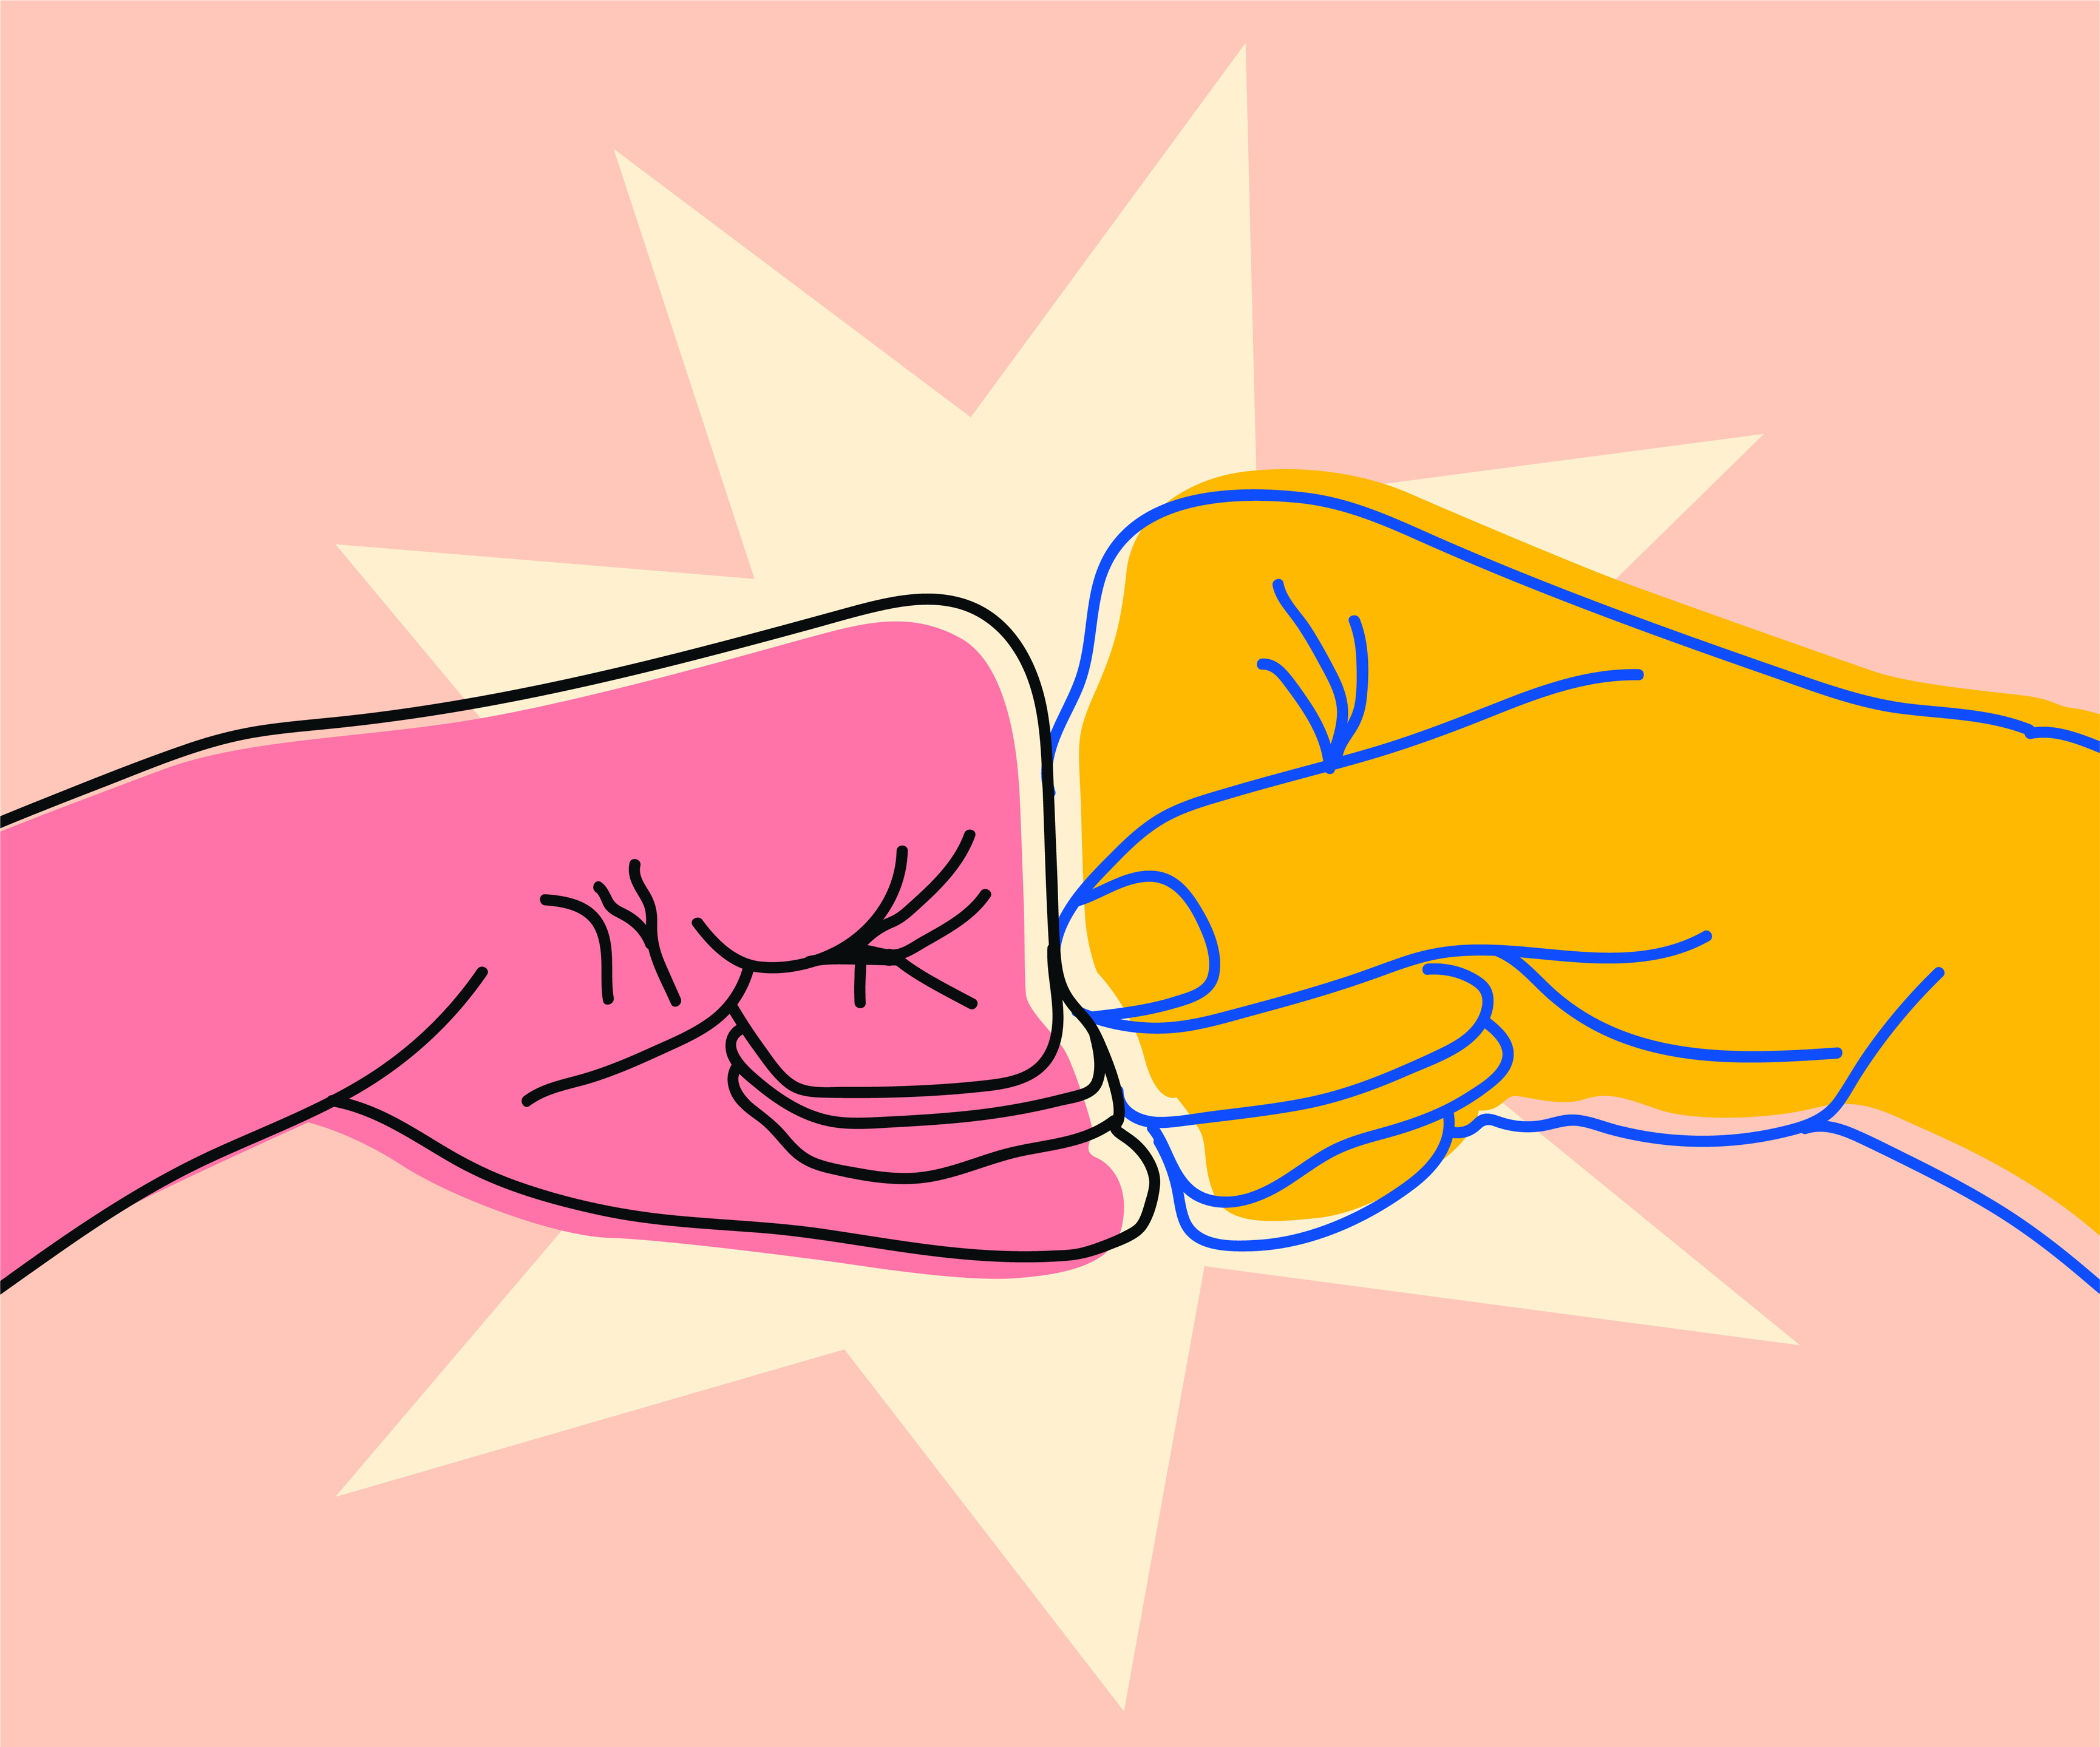 Illustration of two bumping fists against a light pink background.